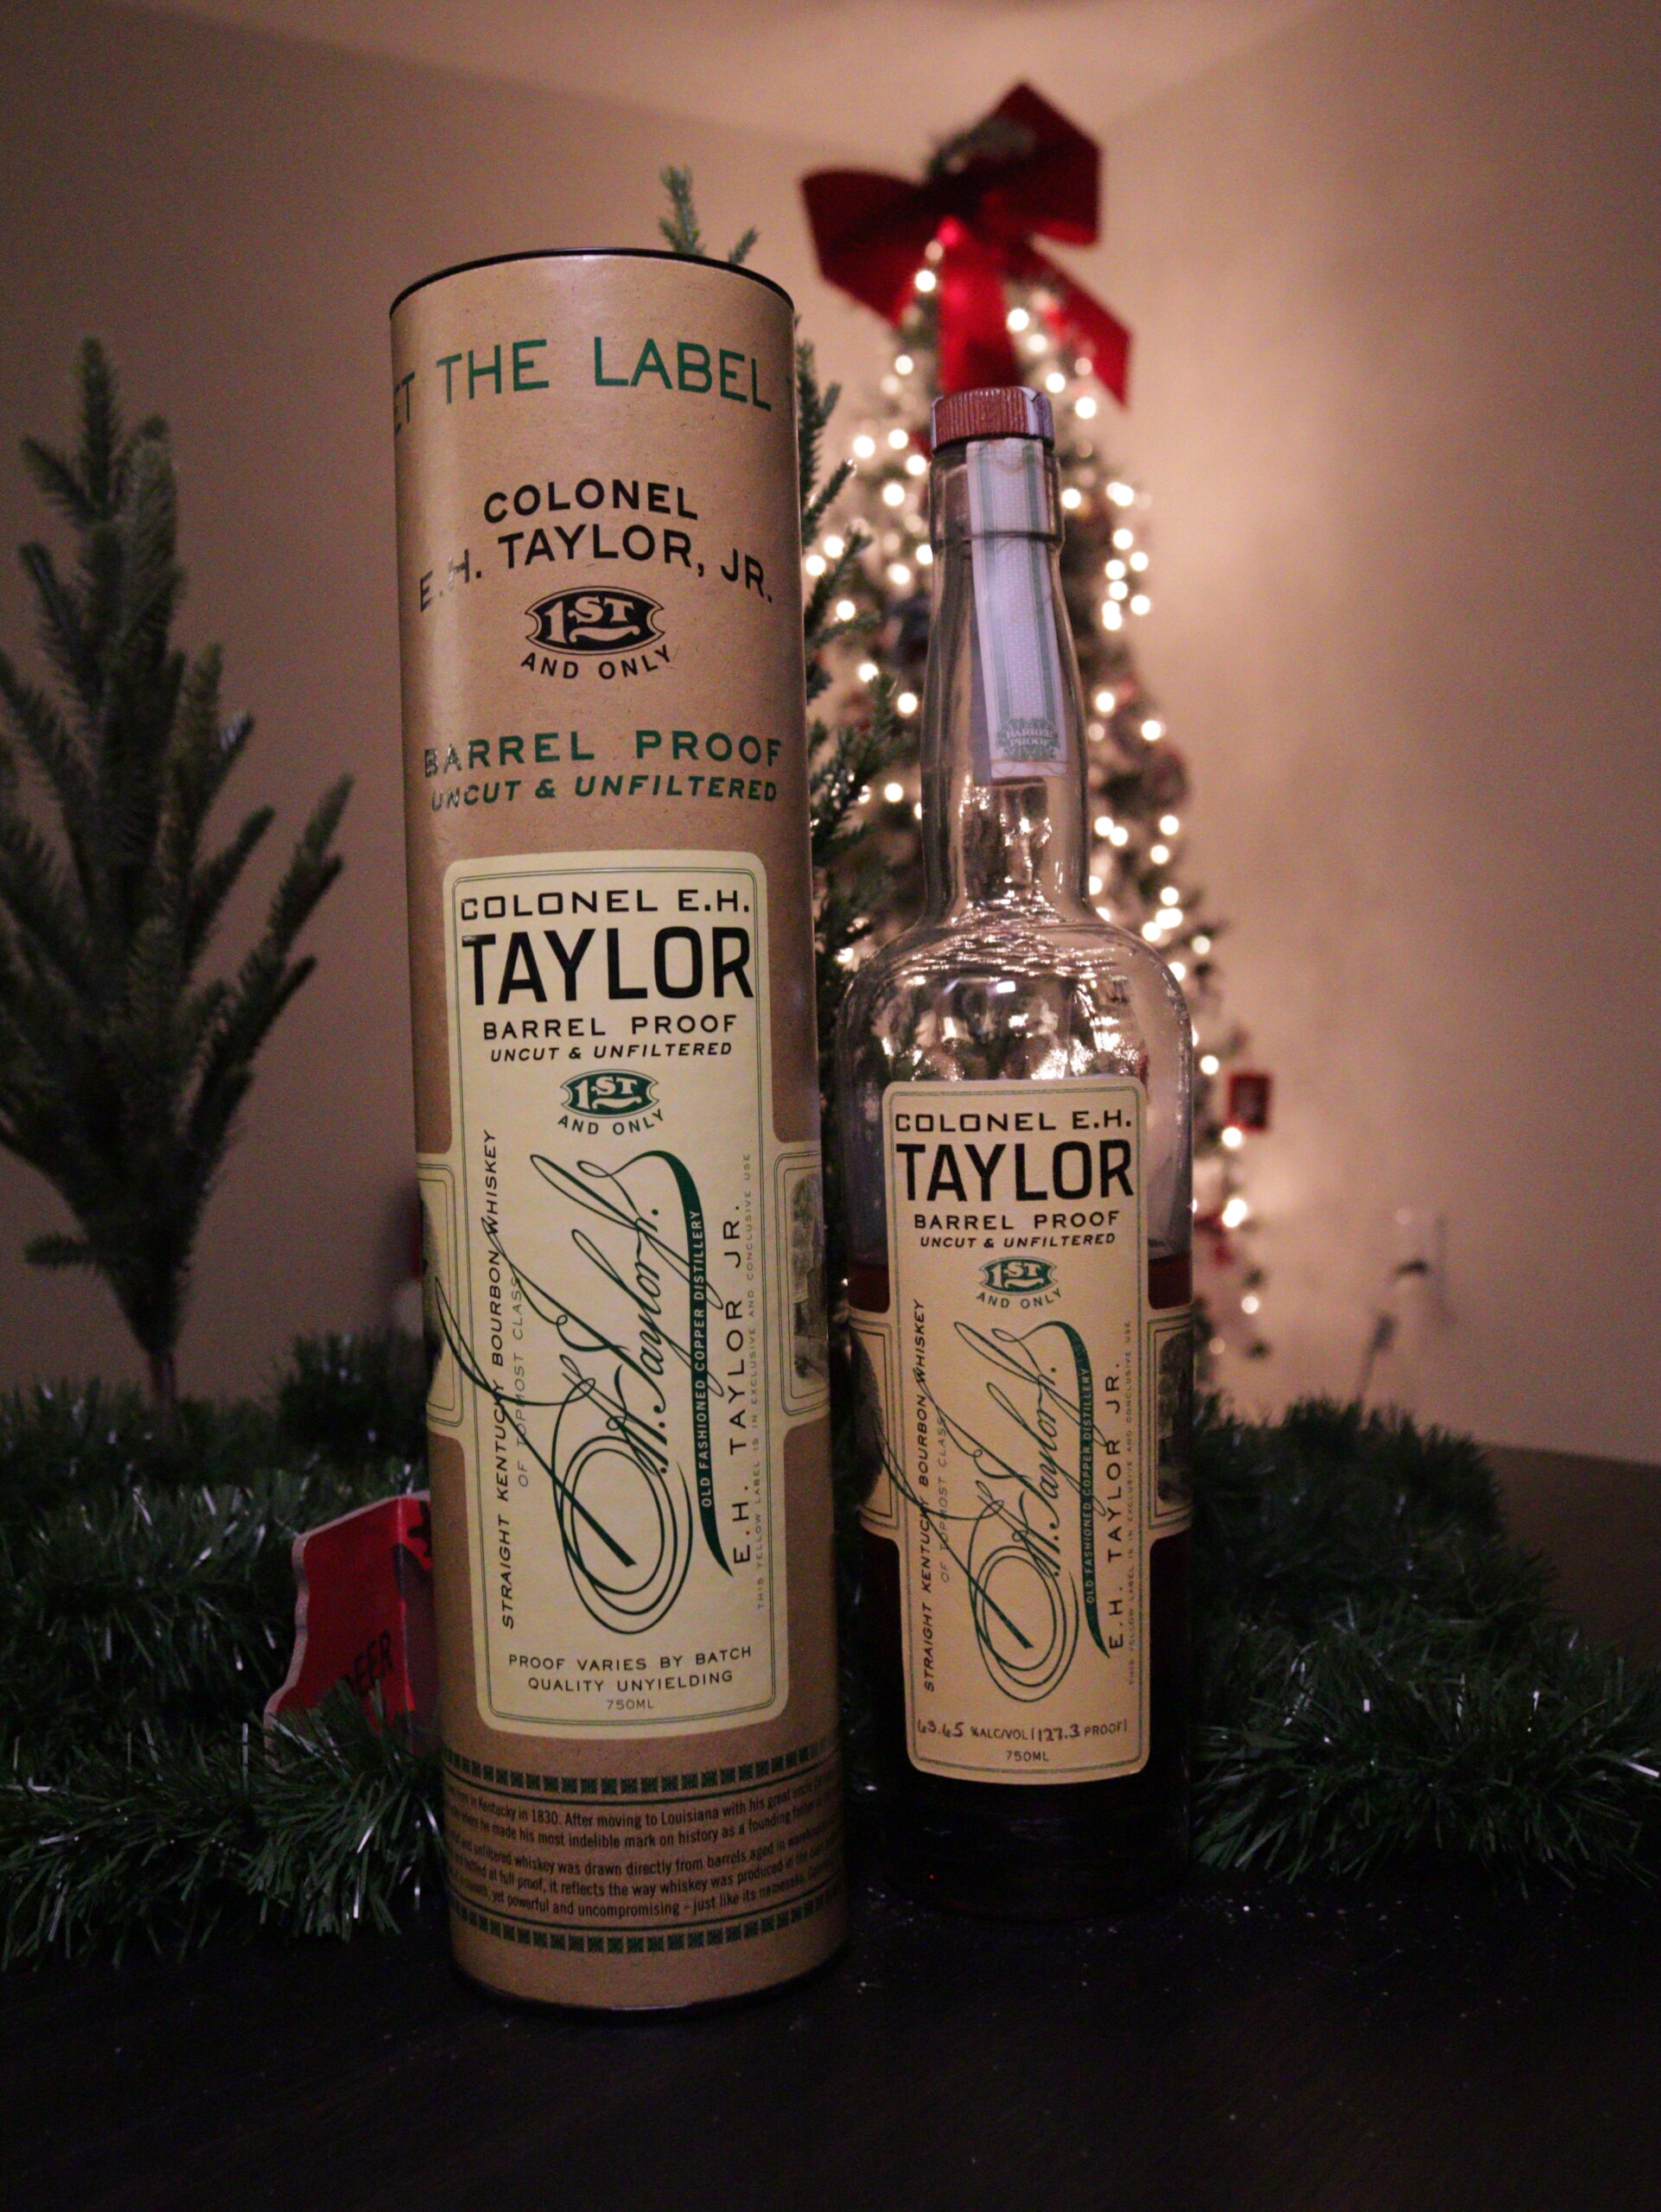 Need a Blanket? E.H. Taylor Barrel Proof Will Provide!